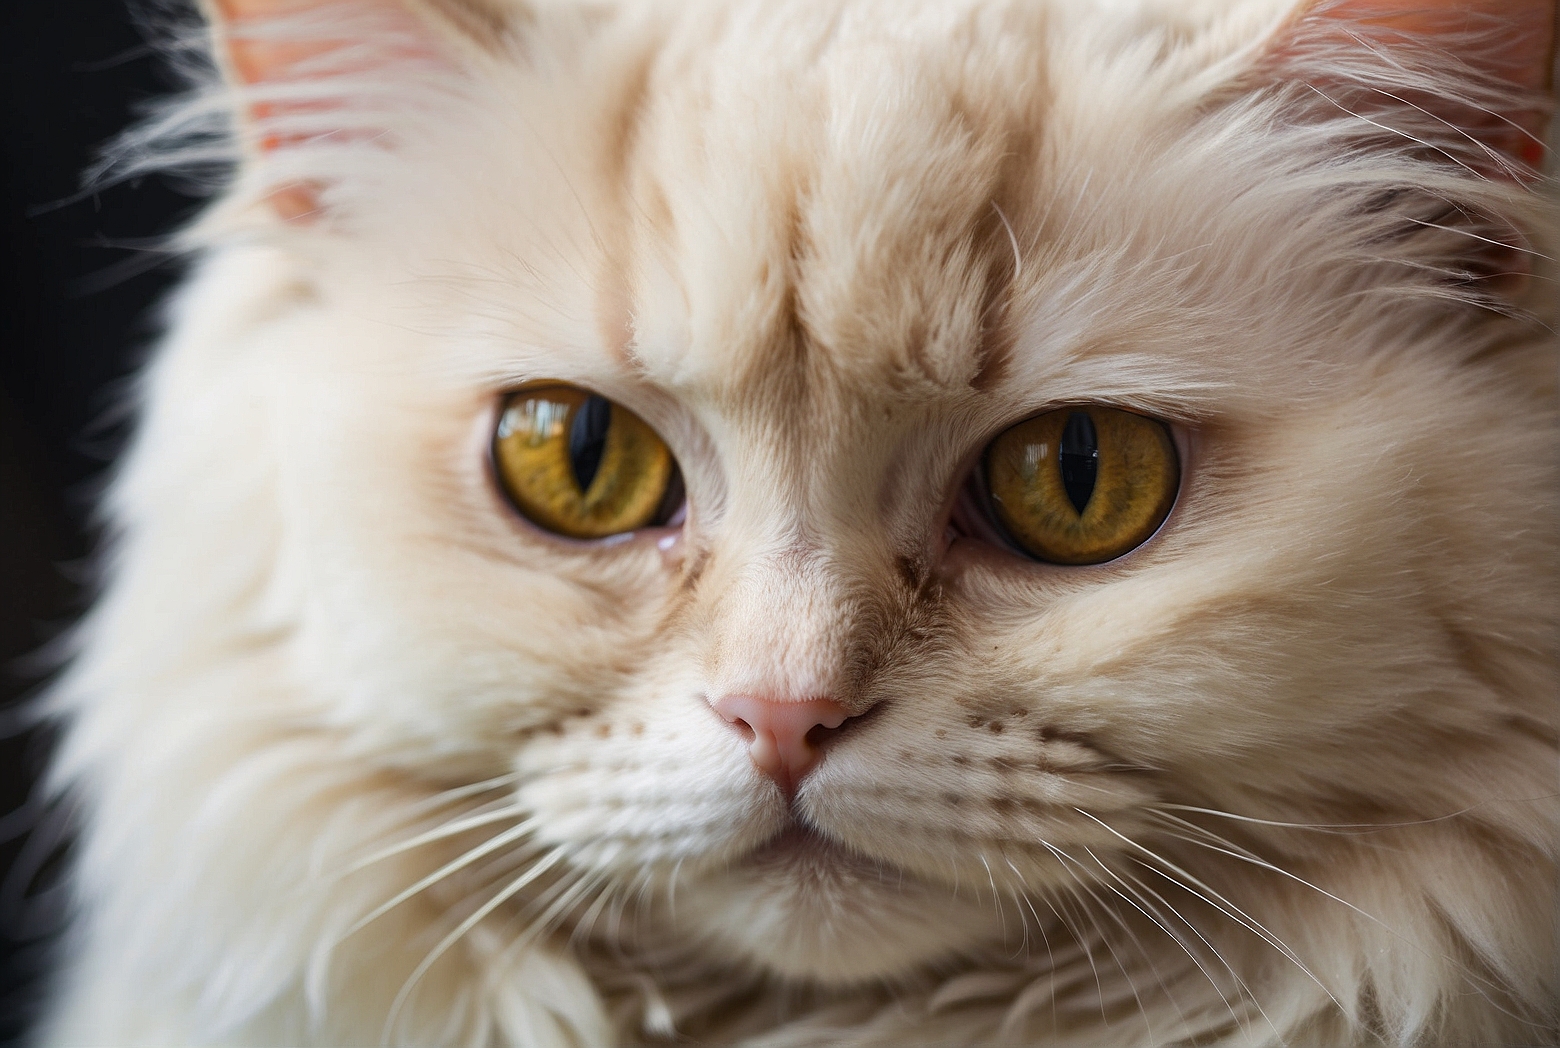 How To Clean Persian Cat Eyes